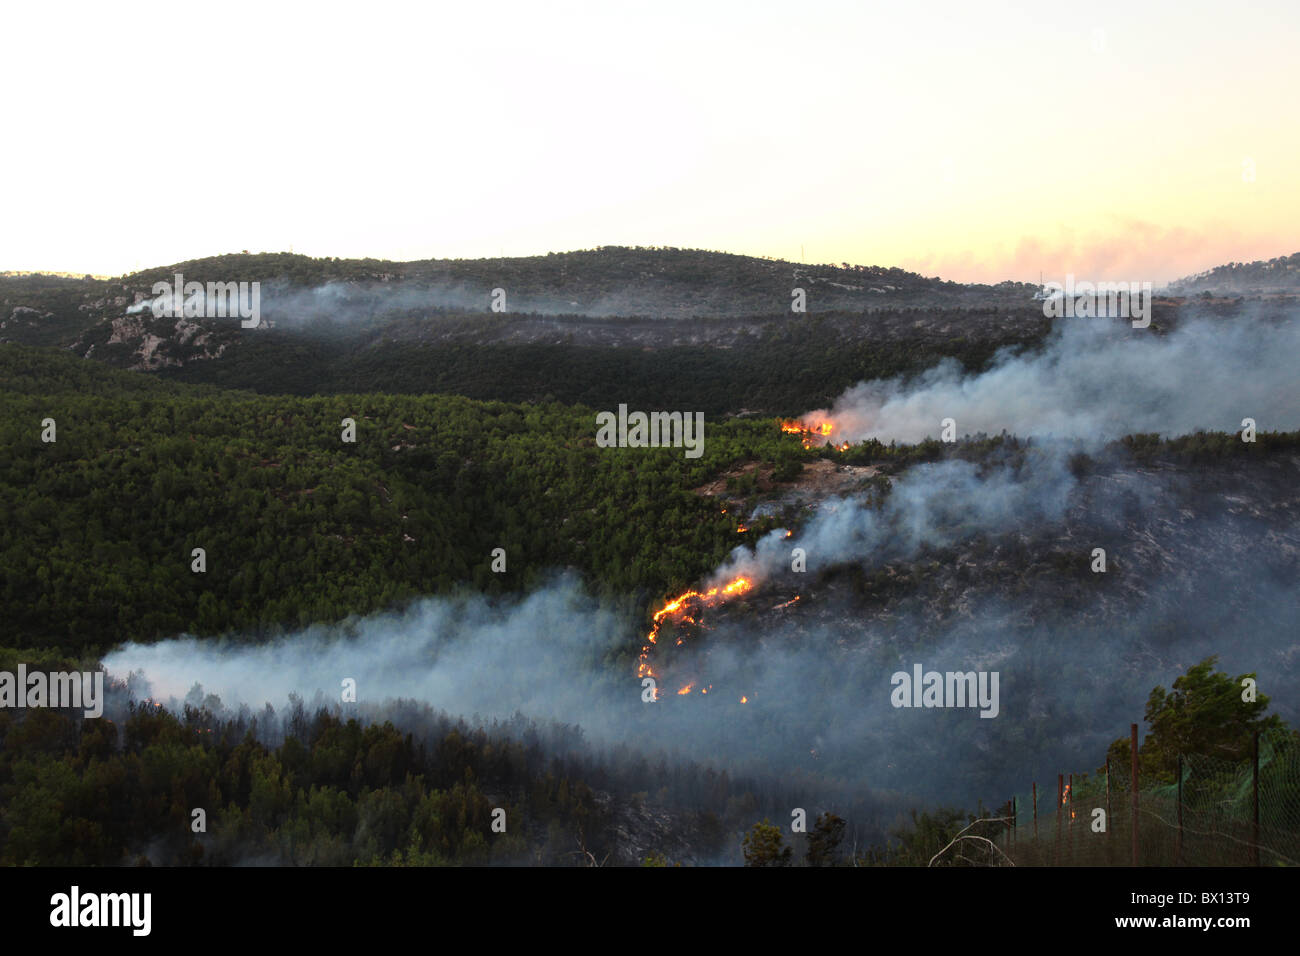 Flames and thick smoke rise from a massive forest fire on Mount Carmel in northern Israel. The fire consumed much of the Mediterranean forest covering the region and claimed 44 lives, making it the deadliest in Israeli history. Stock Photo